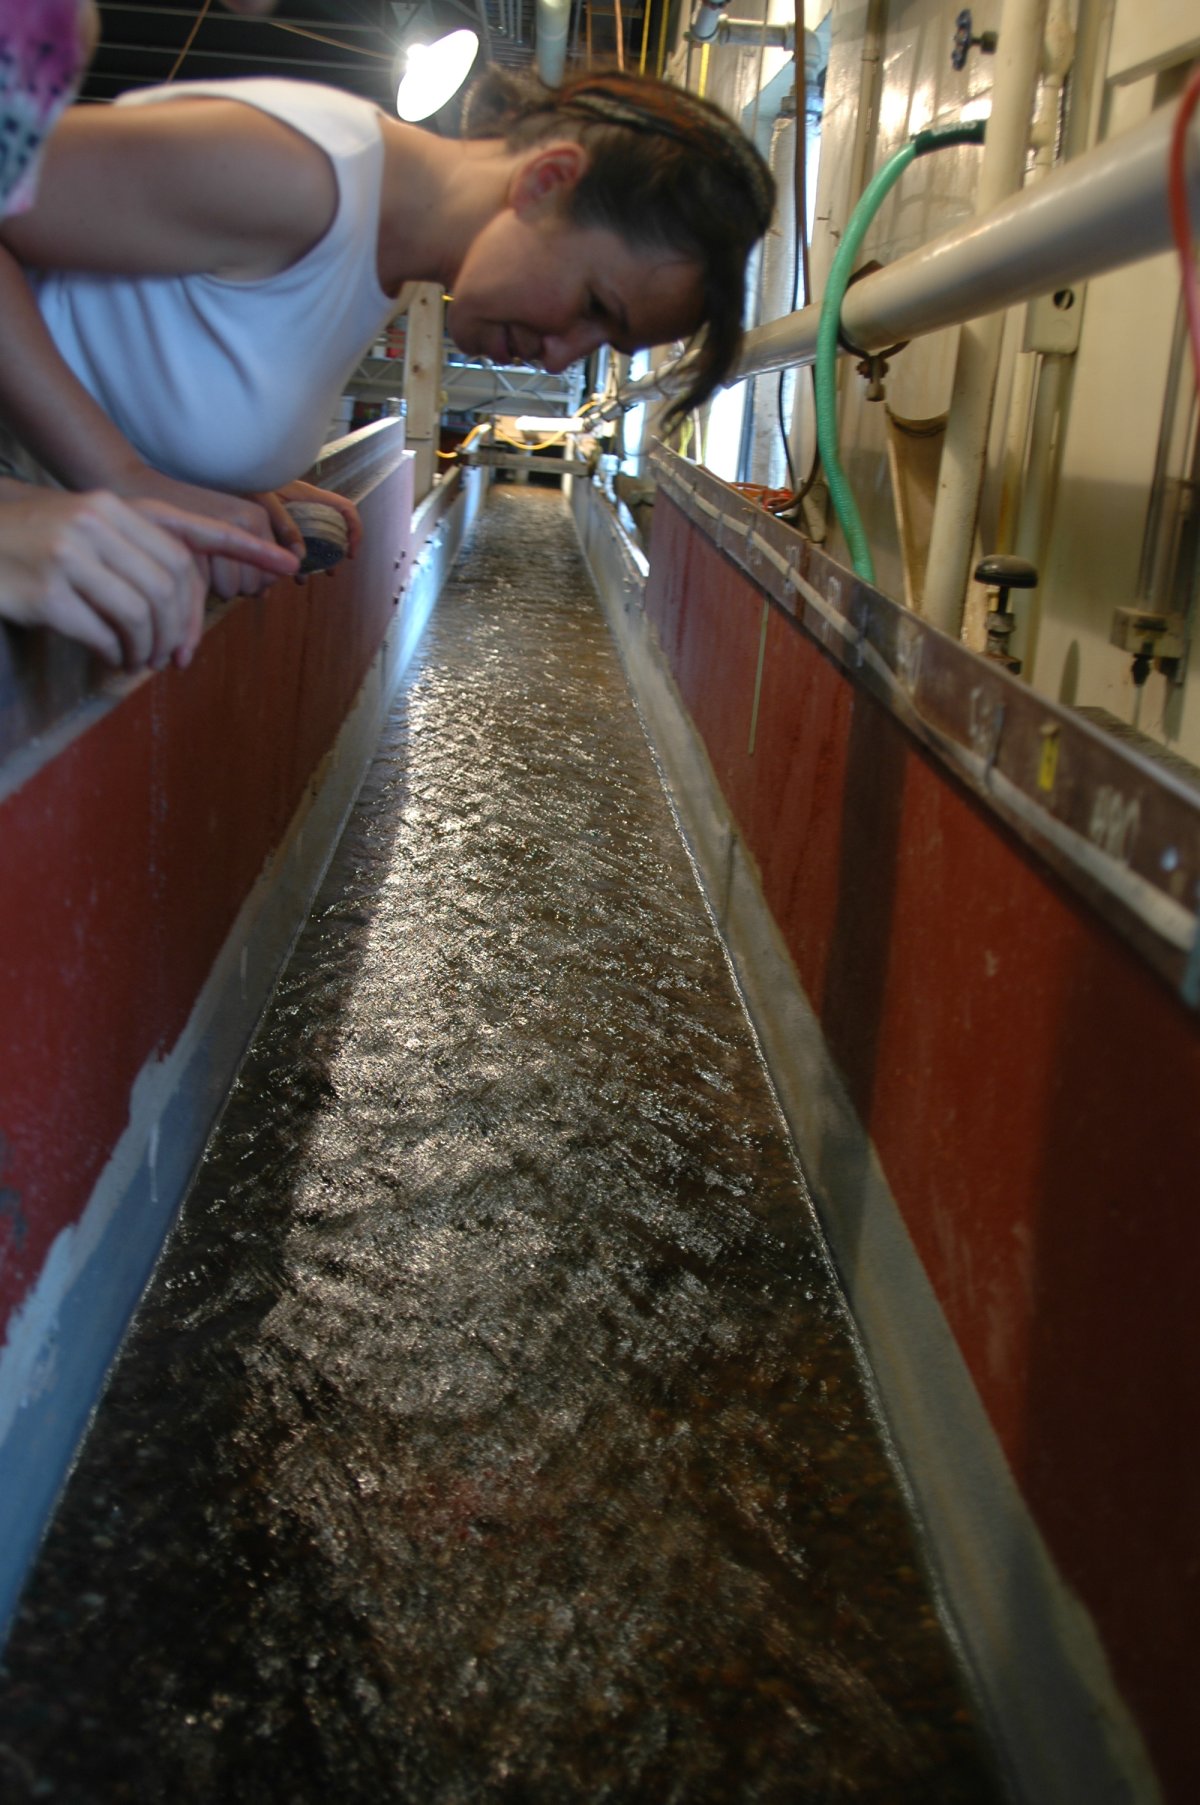 Kimberly Hill looking into the sediment transport flume